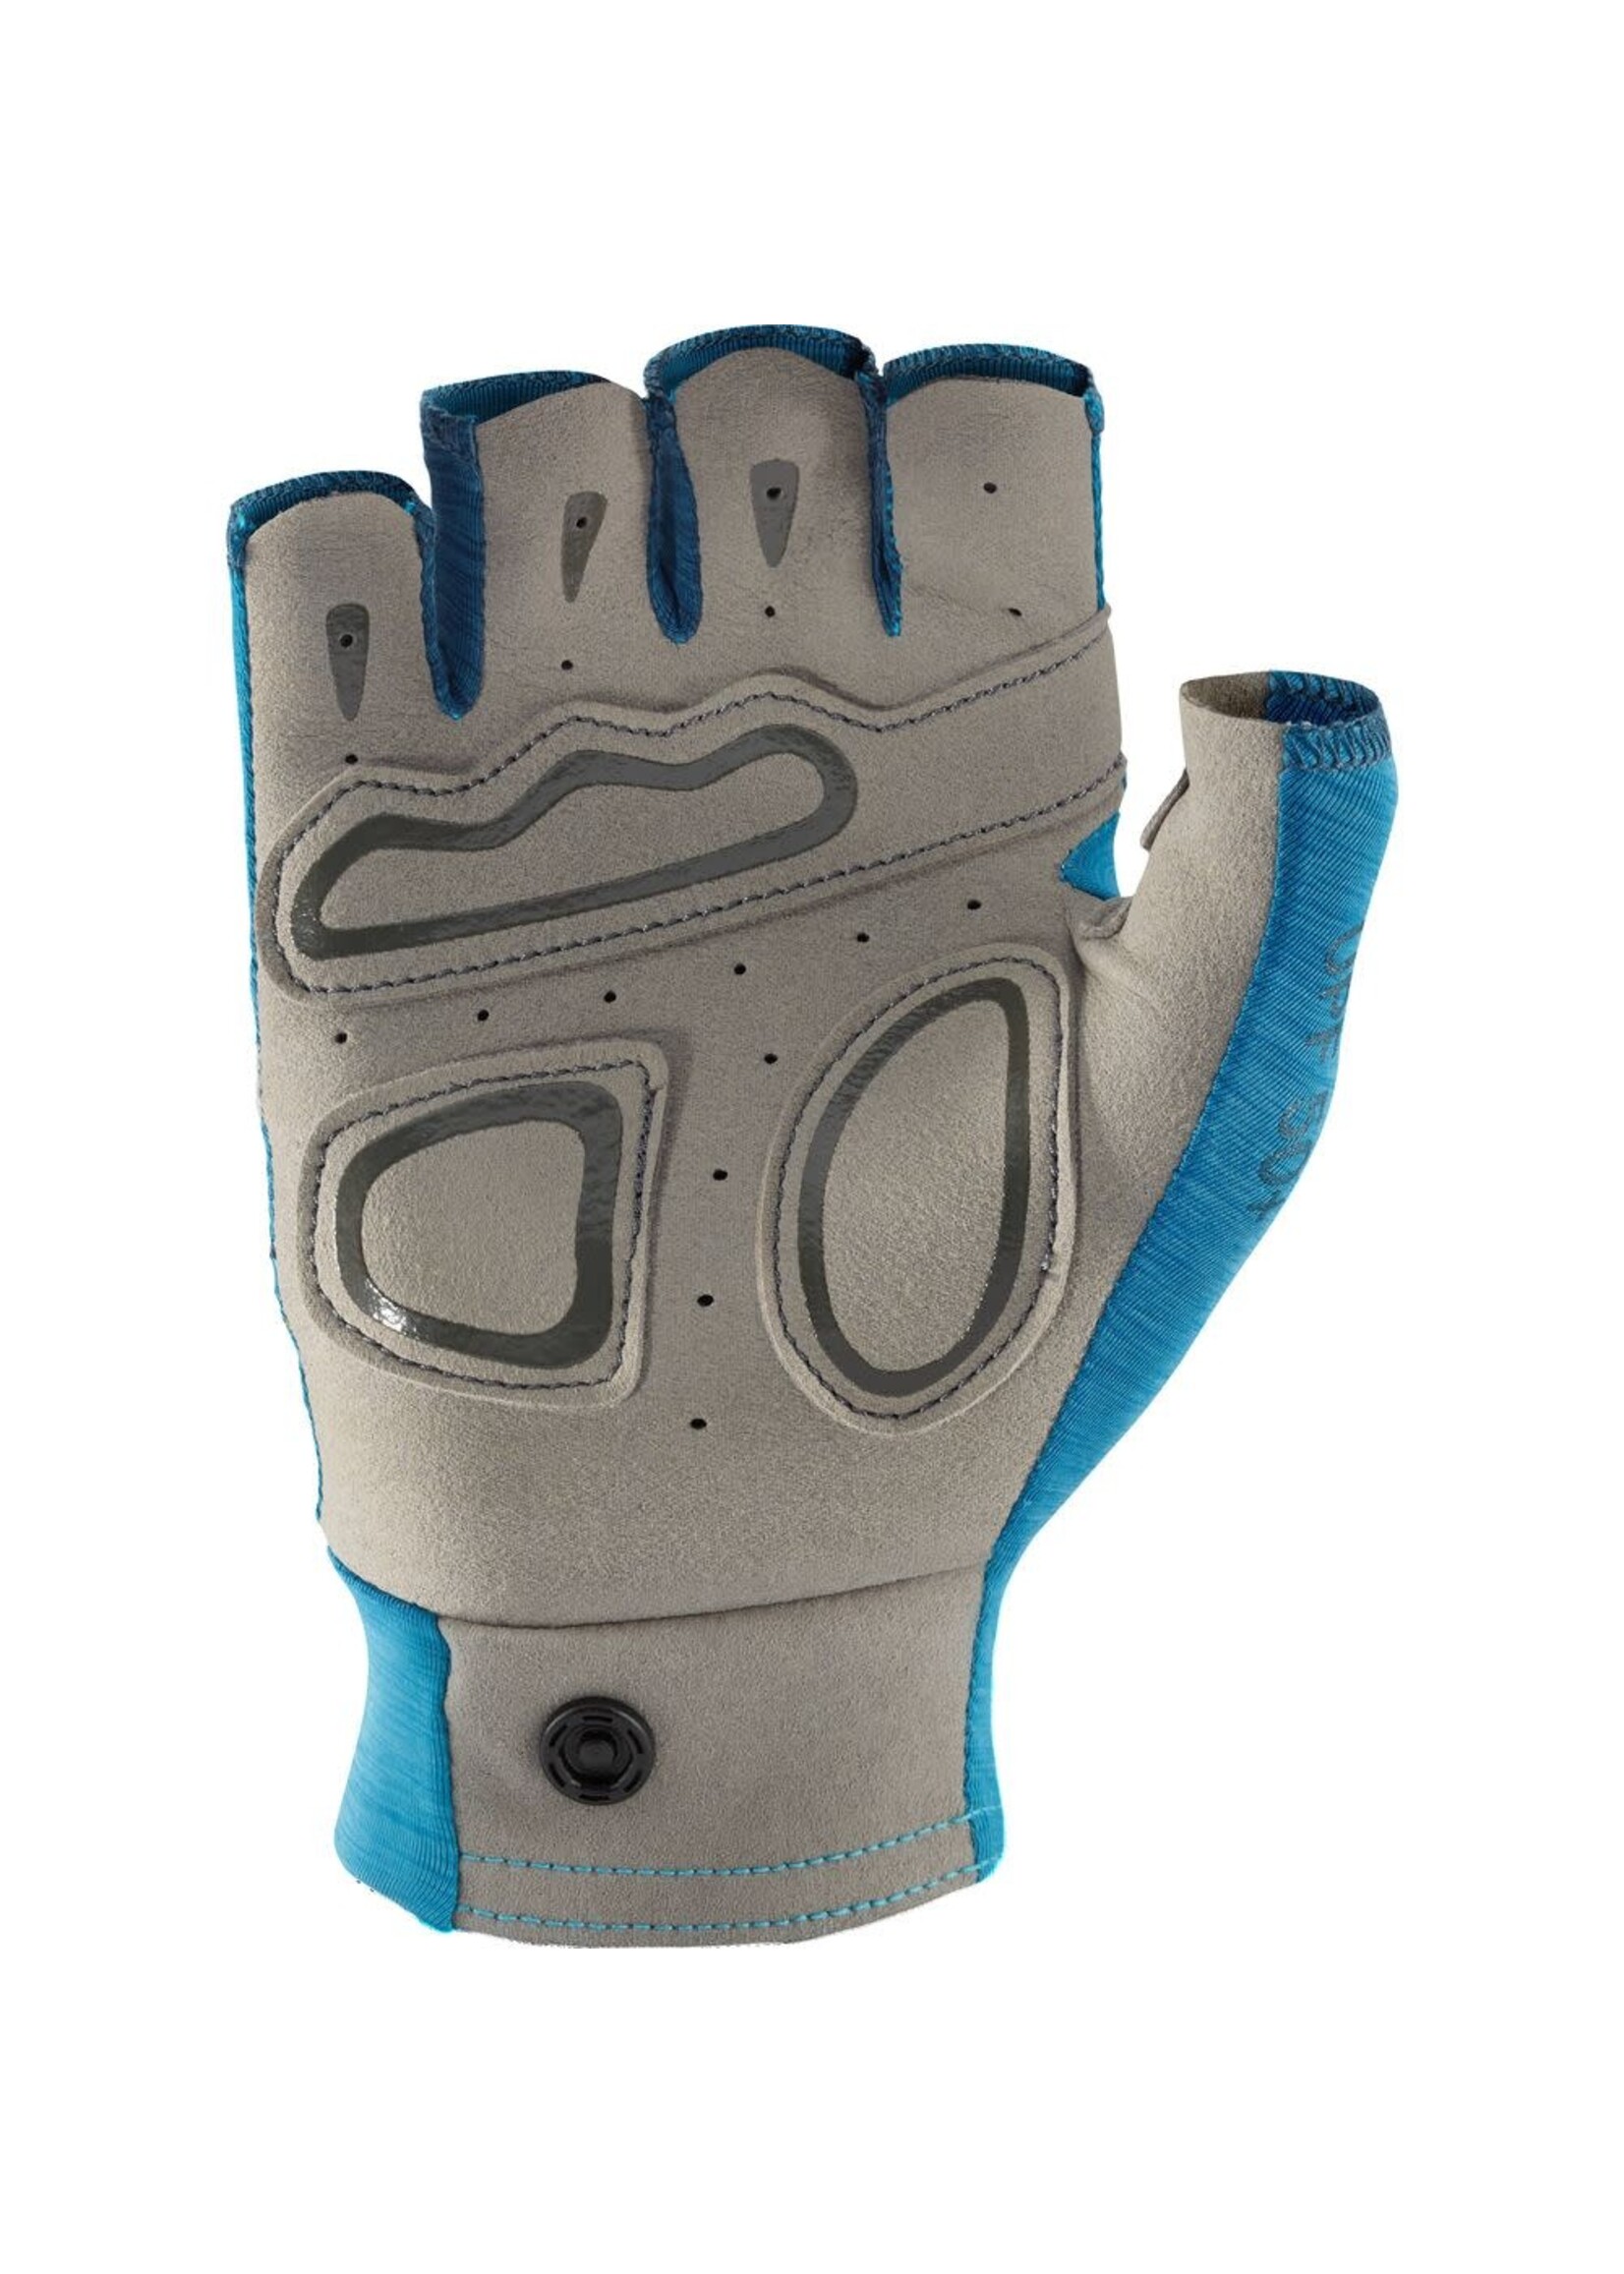 NRS NRS Womens Boater's Glove Fjord- S